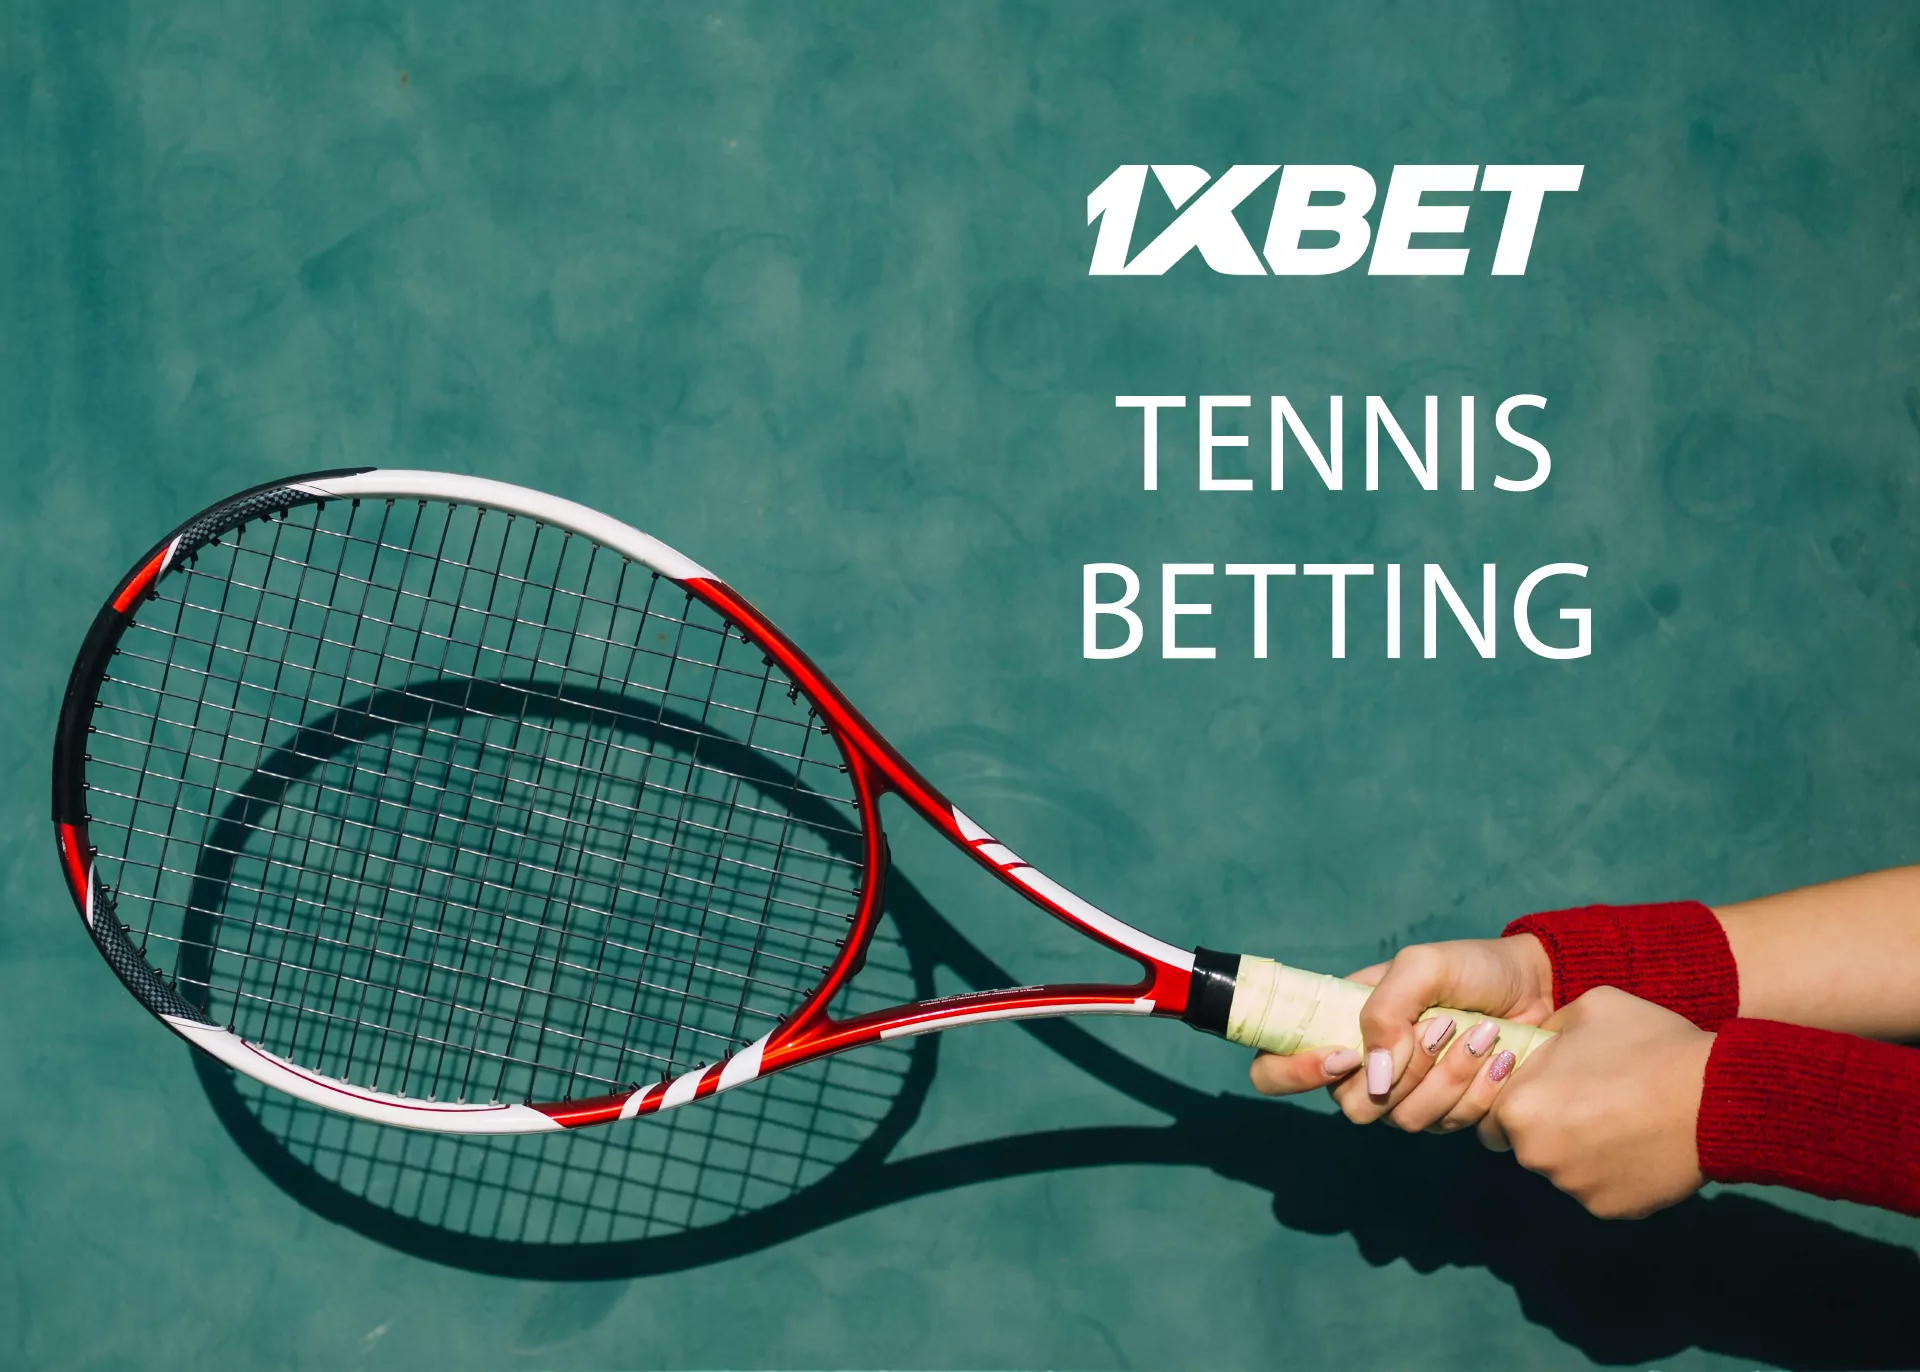 The tennis betting section at 1xBet is represented by major tournaments.